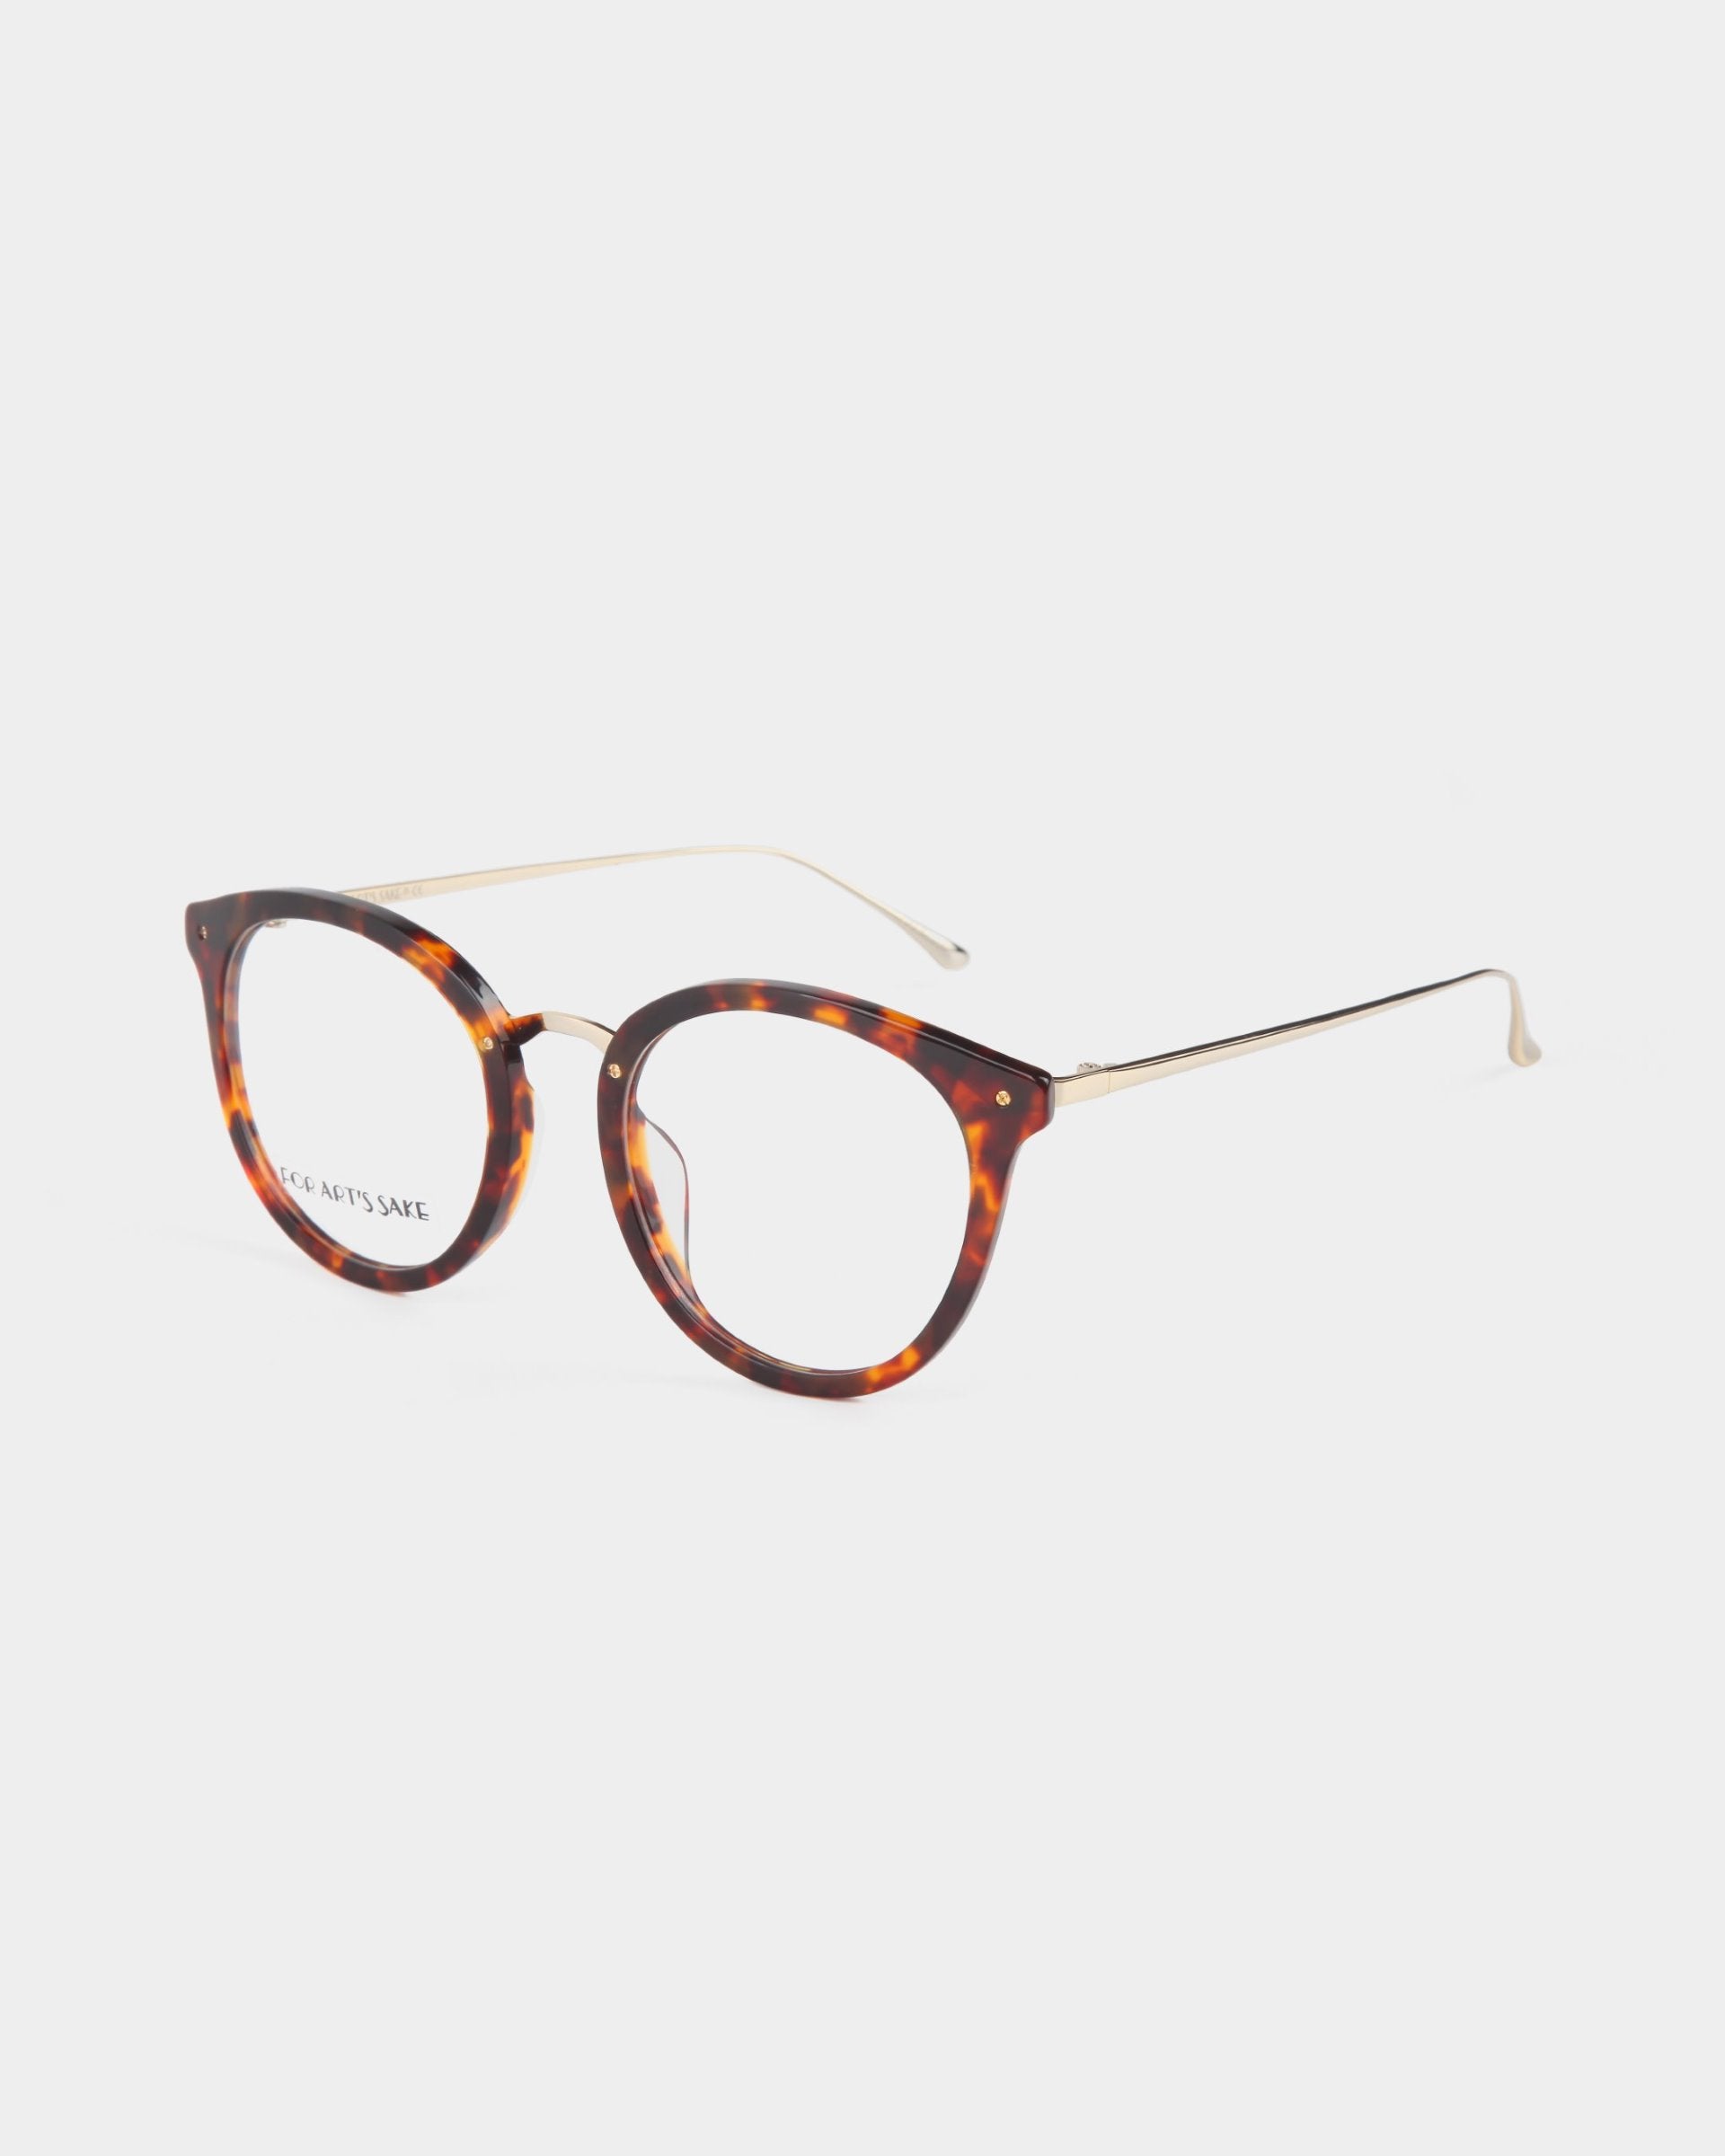 A pair of Jackie eyeglasses by For Art's Sake® with round tortoiseshell frames and slender gold metal temples. The tips of the temples are curved slightly for a comfortable fit. Featuring UV protection lenses, a small logo is visible on one lens. The overall design is stylish and modern.